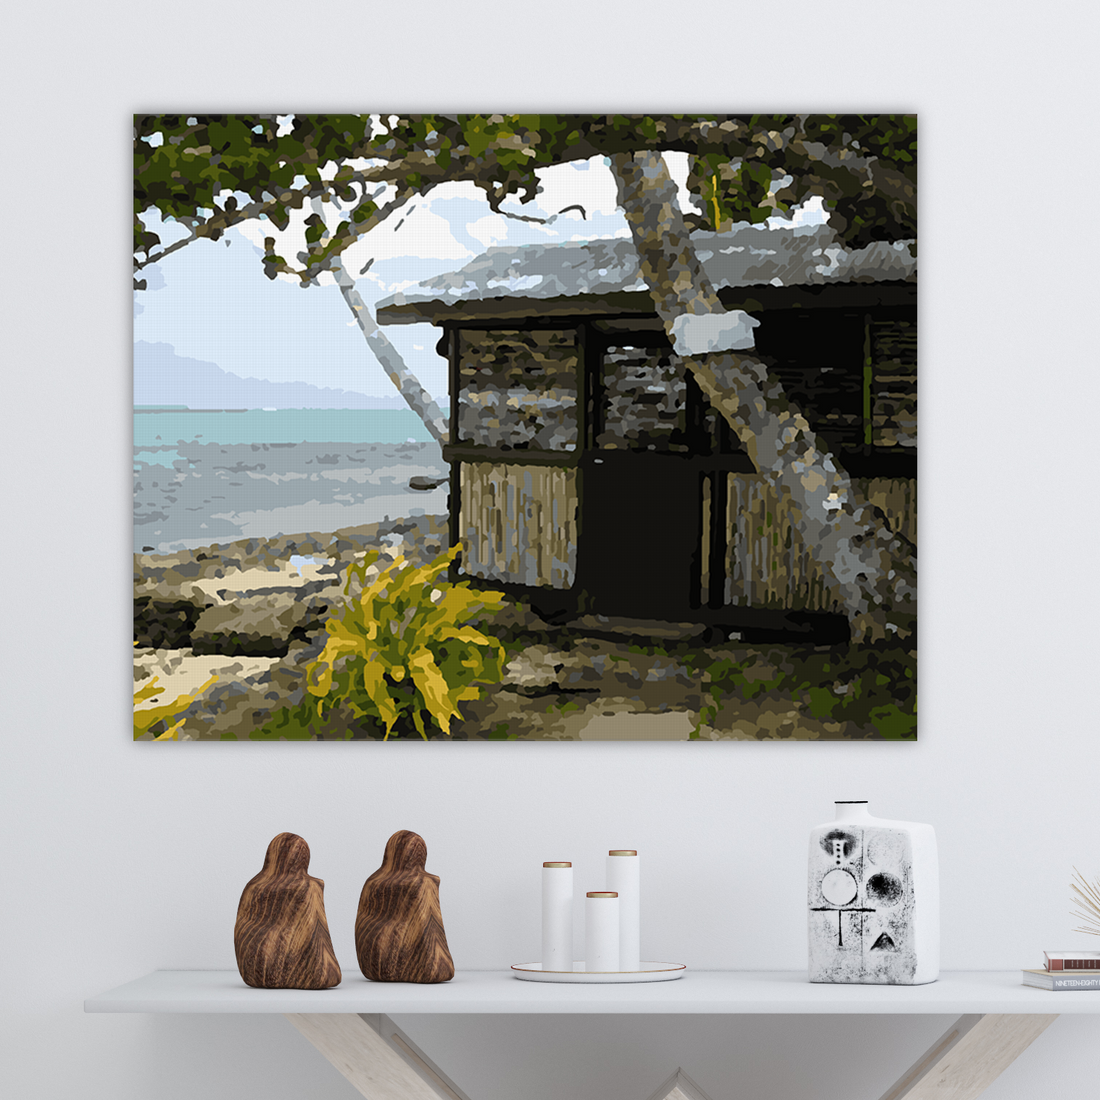 Beach Hut in Fiji - Paint By Numbers Kit